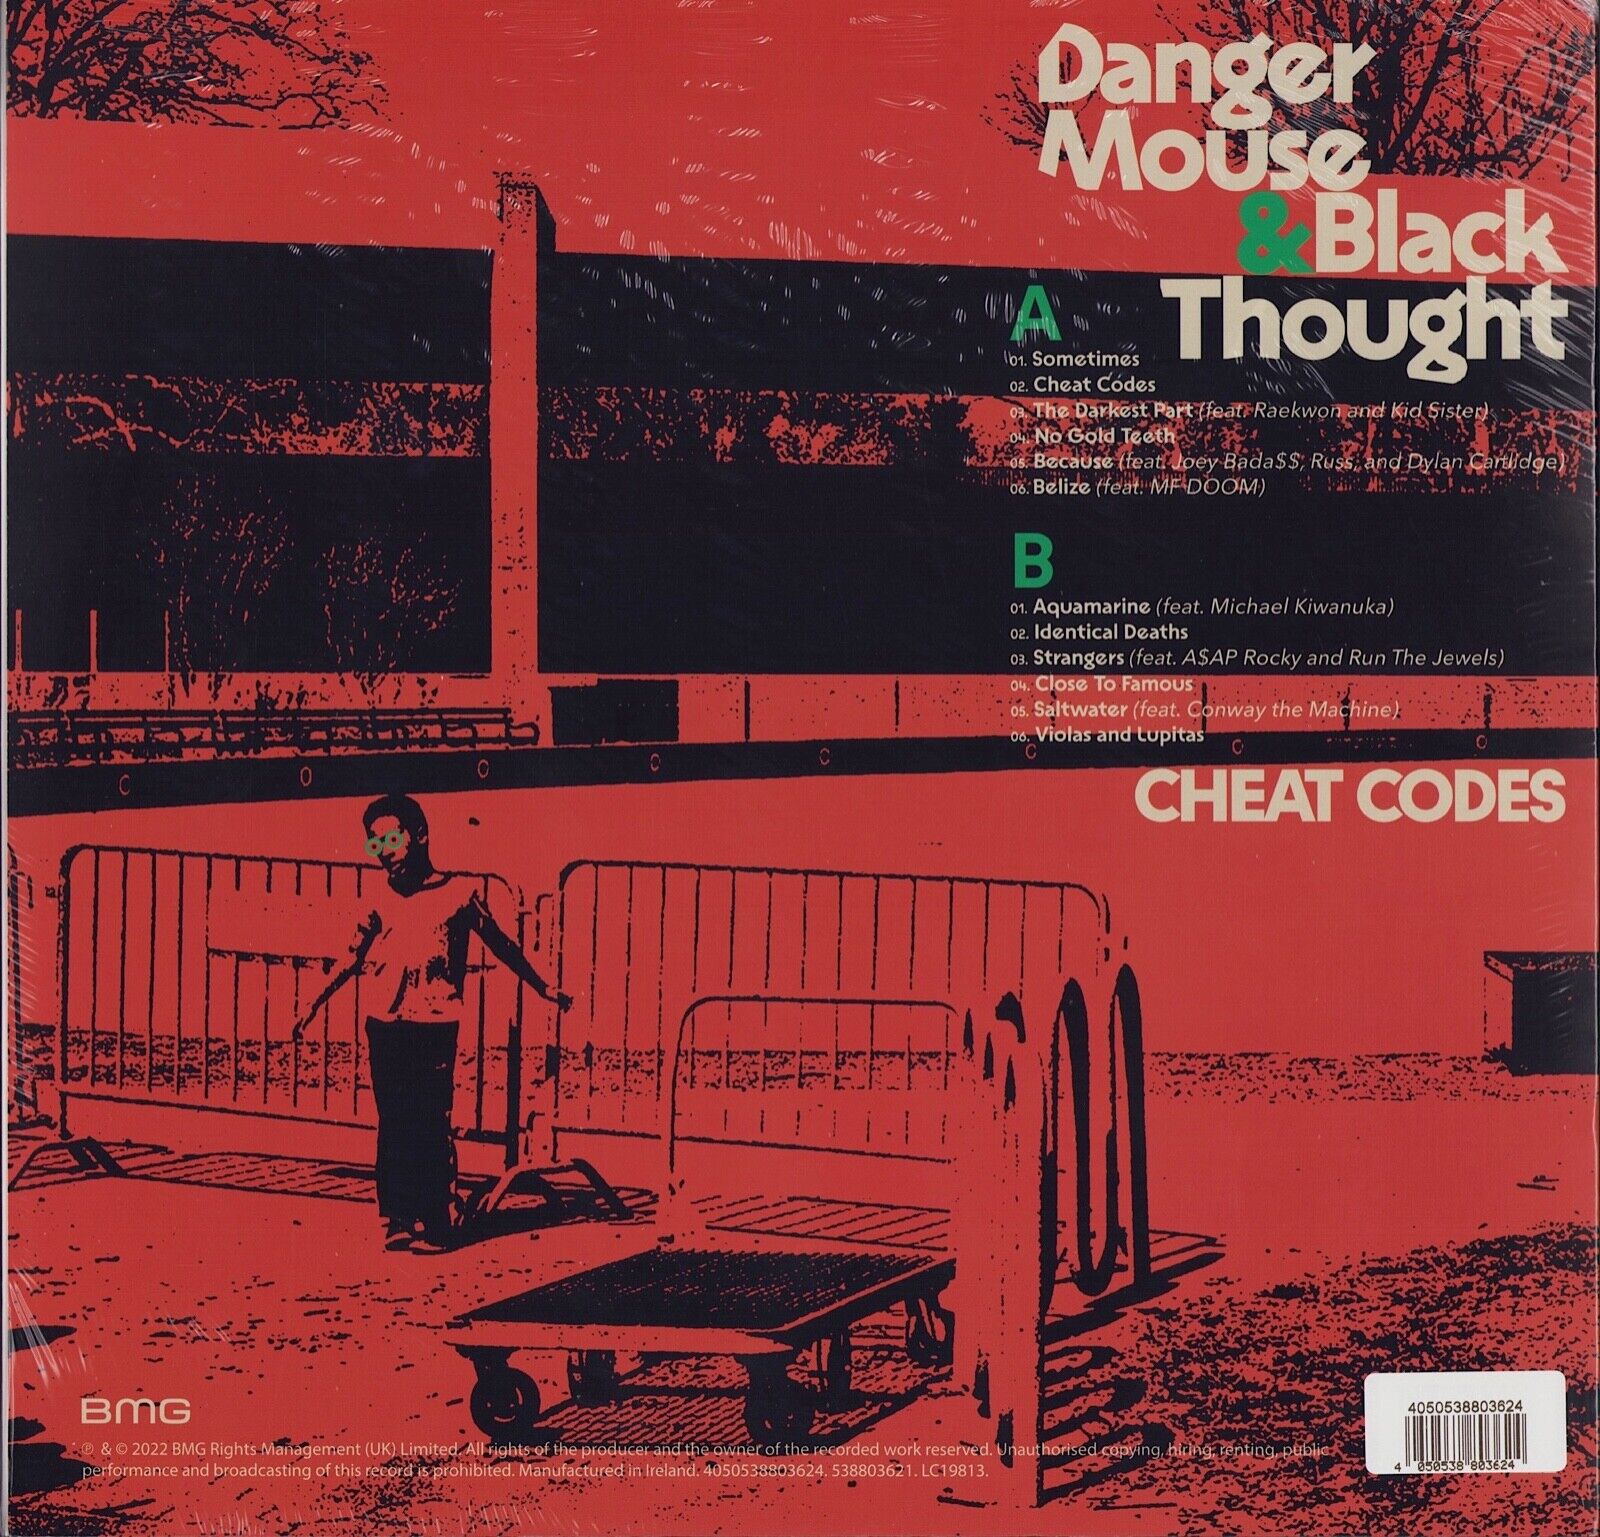 Danger Mouse, Black Thought - Cheat Codes (Red Vinyl LP + CD 